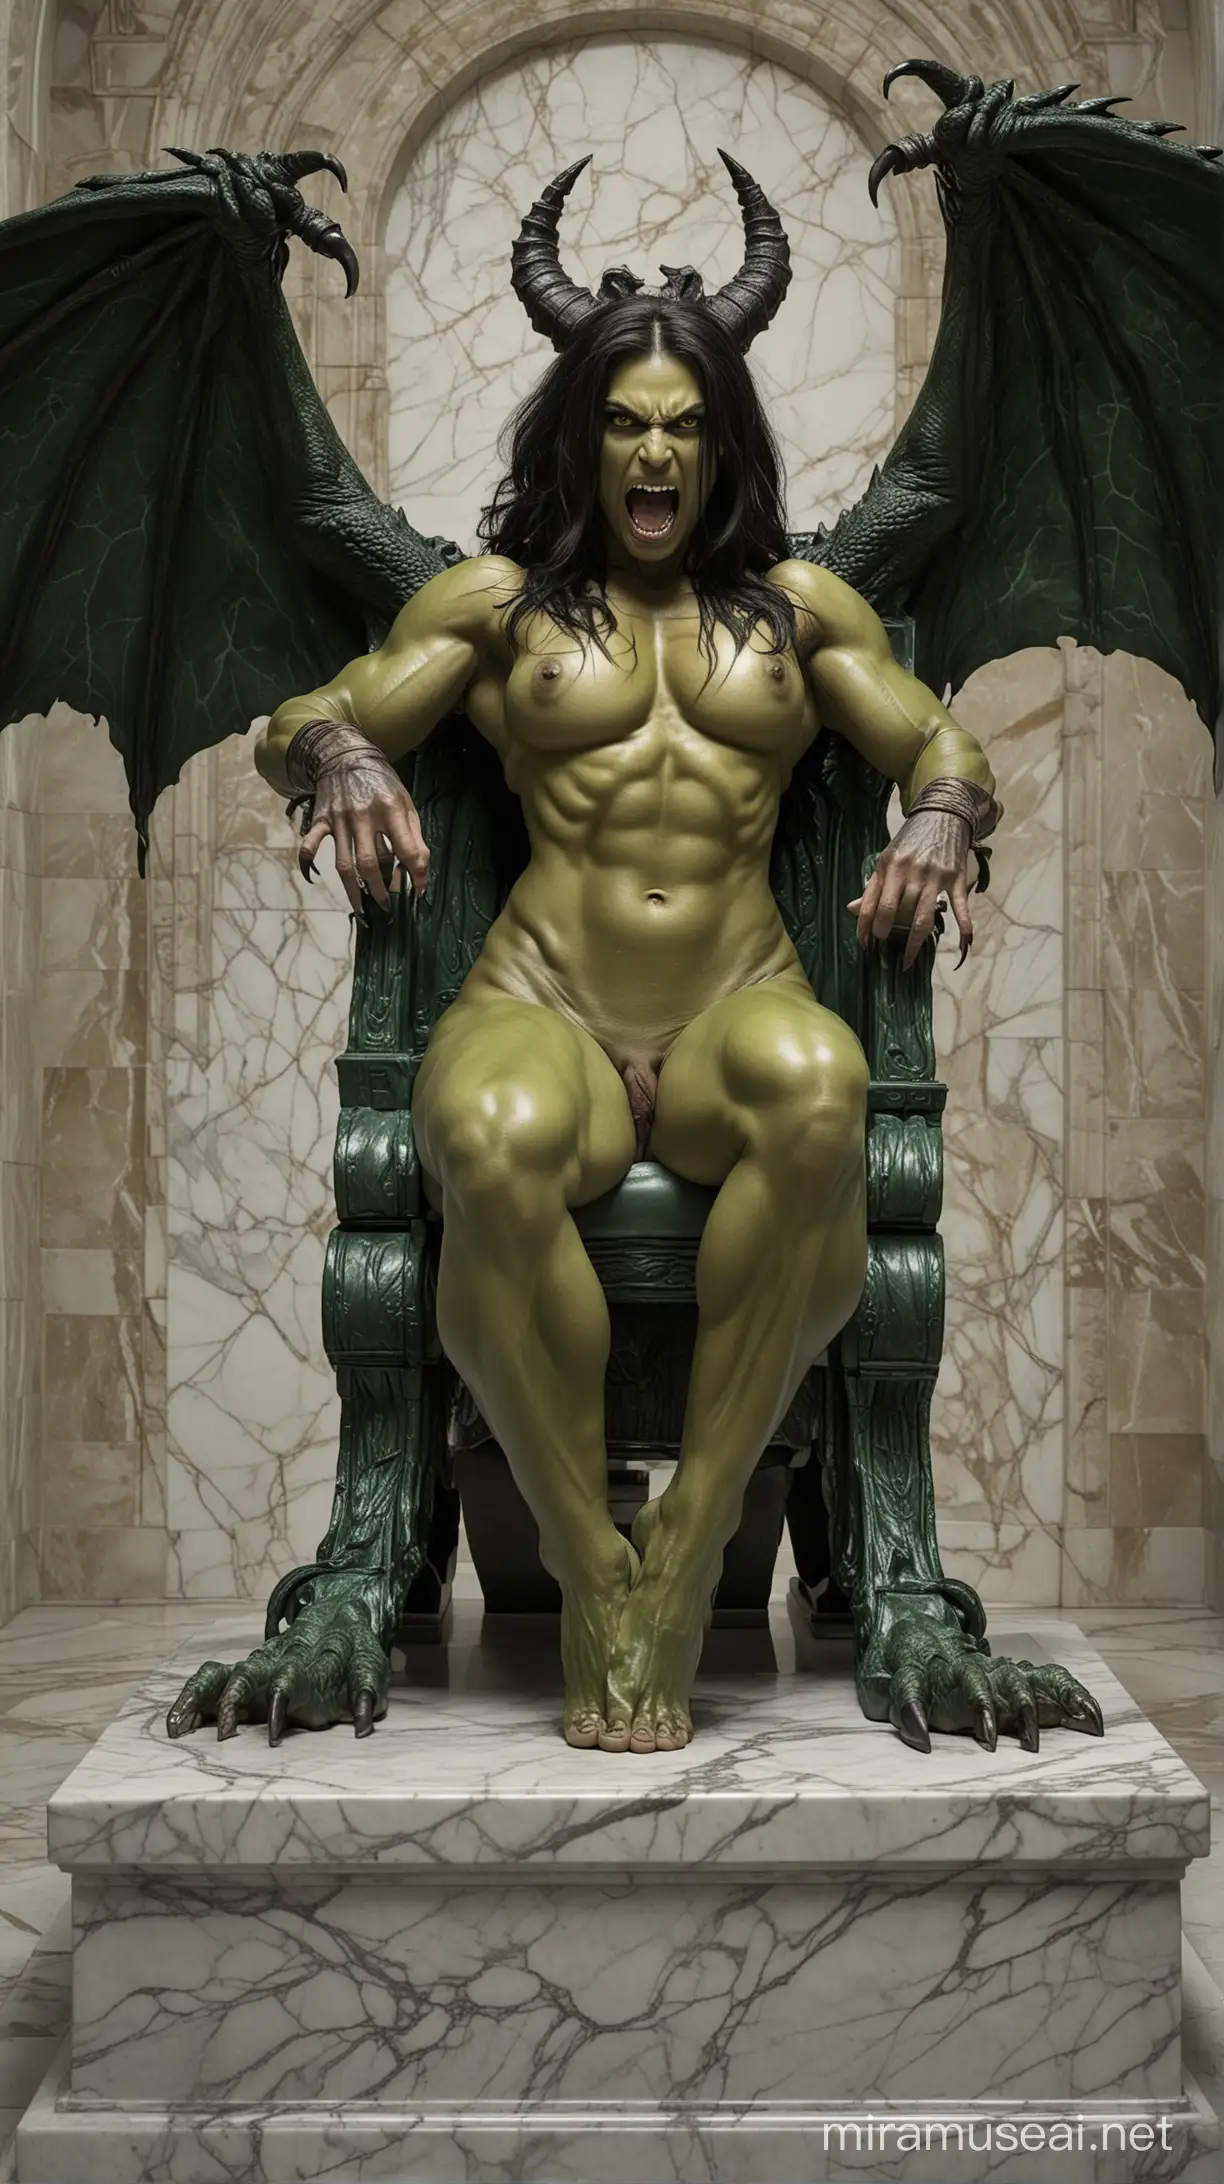 Powerful Female Monster with Dragon Wings Seated on Throne